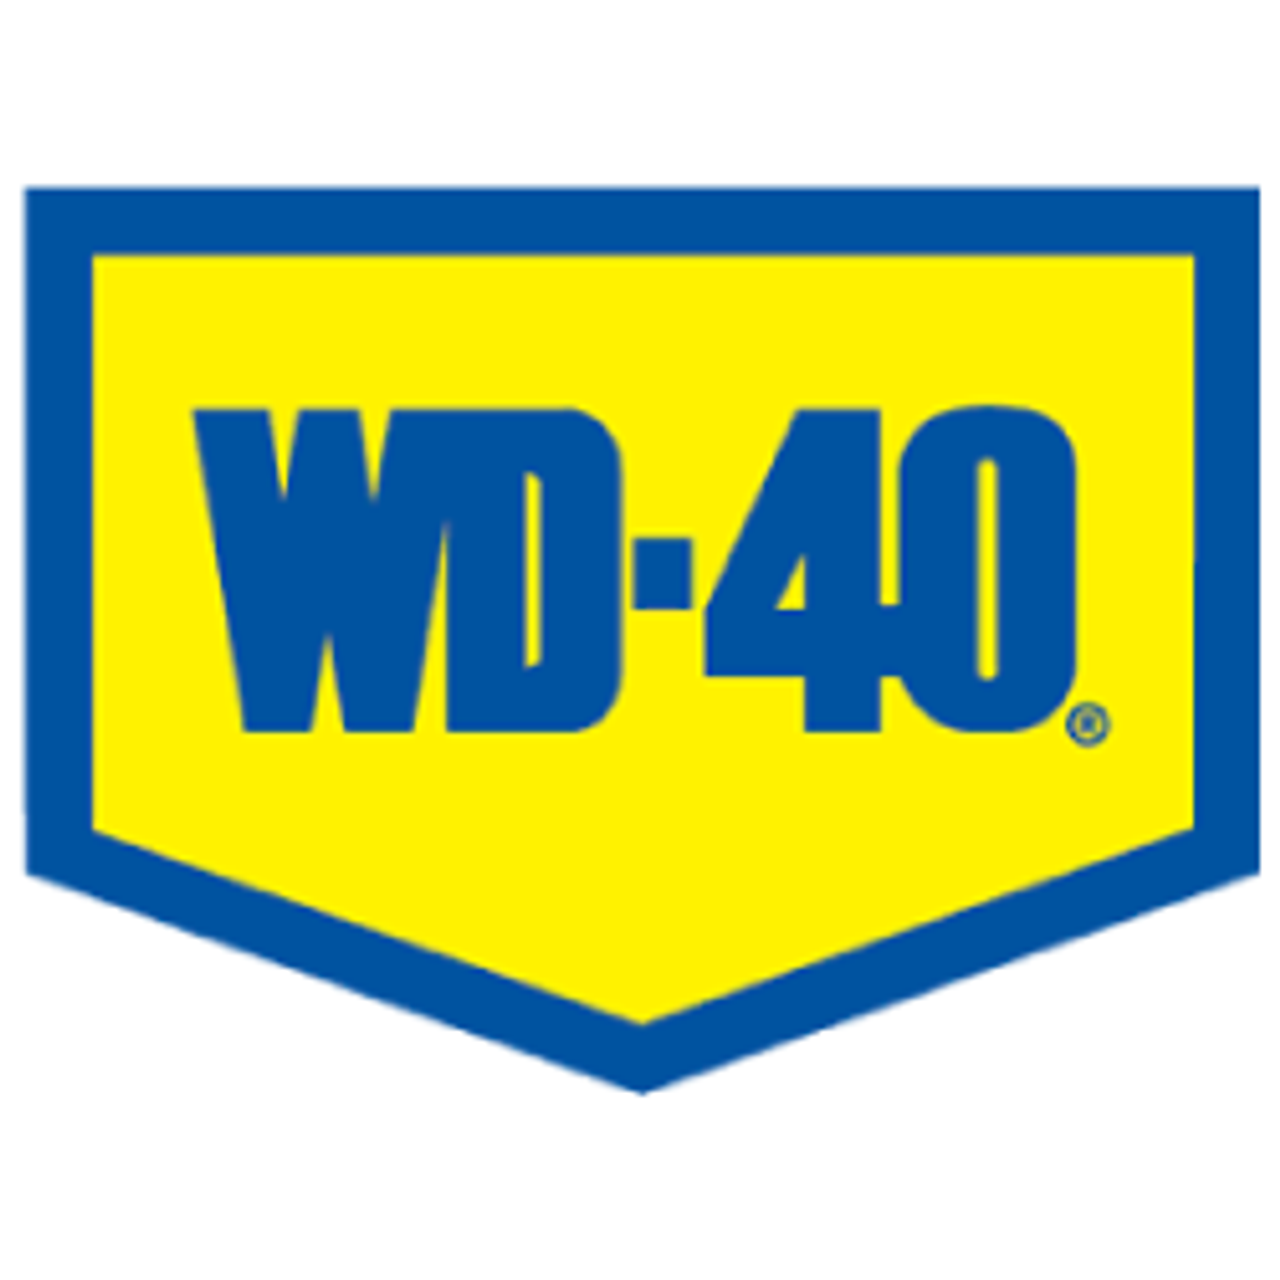 WD-40 Multifunctional Lubricant Spray, 200ml - 780001WD - Pro